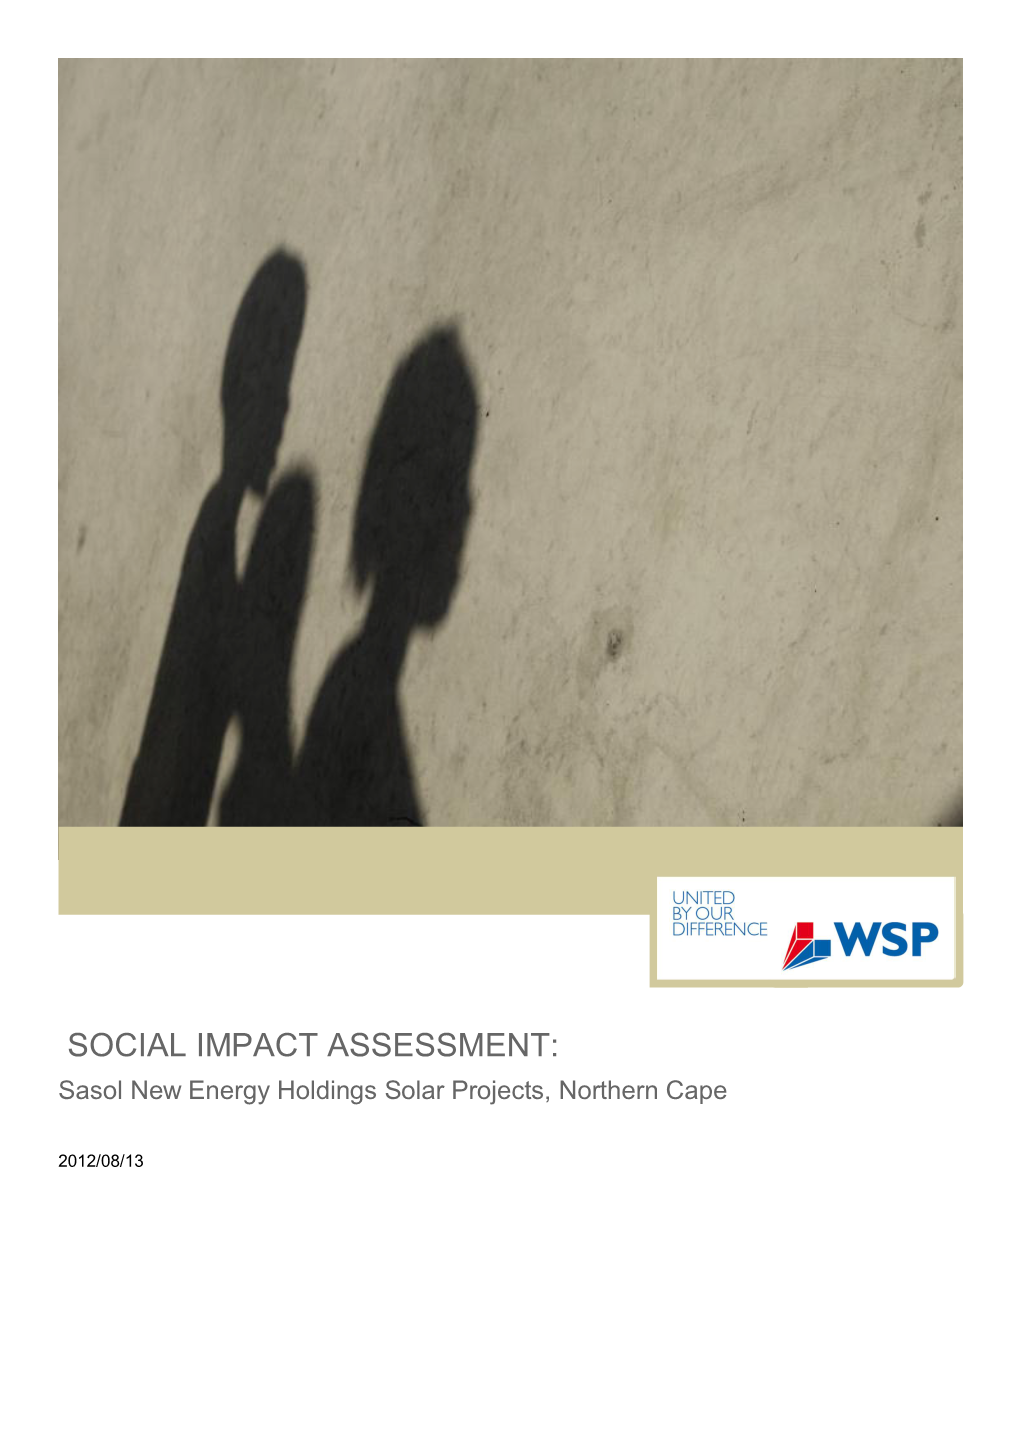 SOCIAL IMPACT ASSESSMENT: Sasol New Energy Holdings Solar Projects, Northern Cape